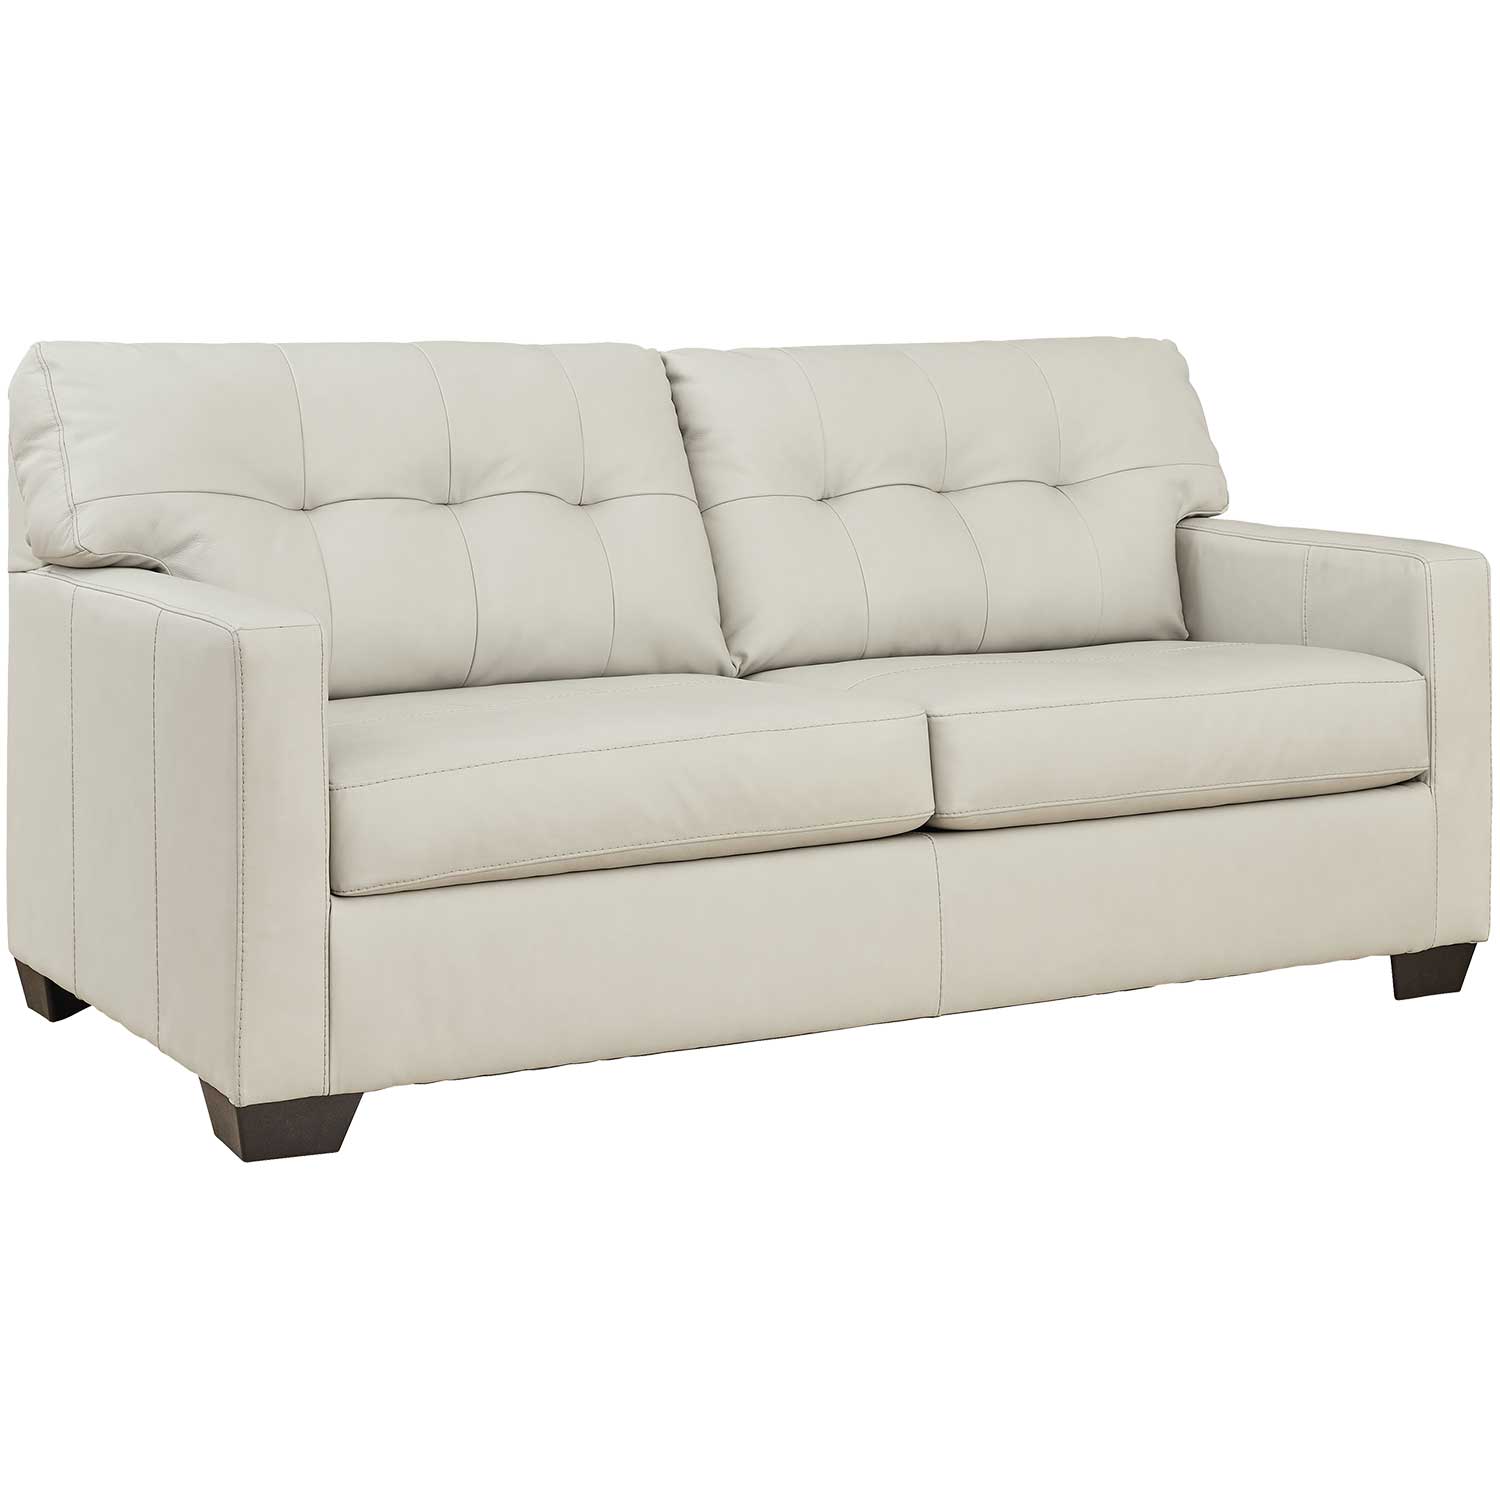 Belziani Coconut Leather Sofa | 0R0-547S | AFW.com